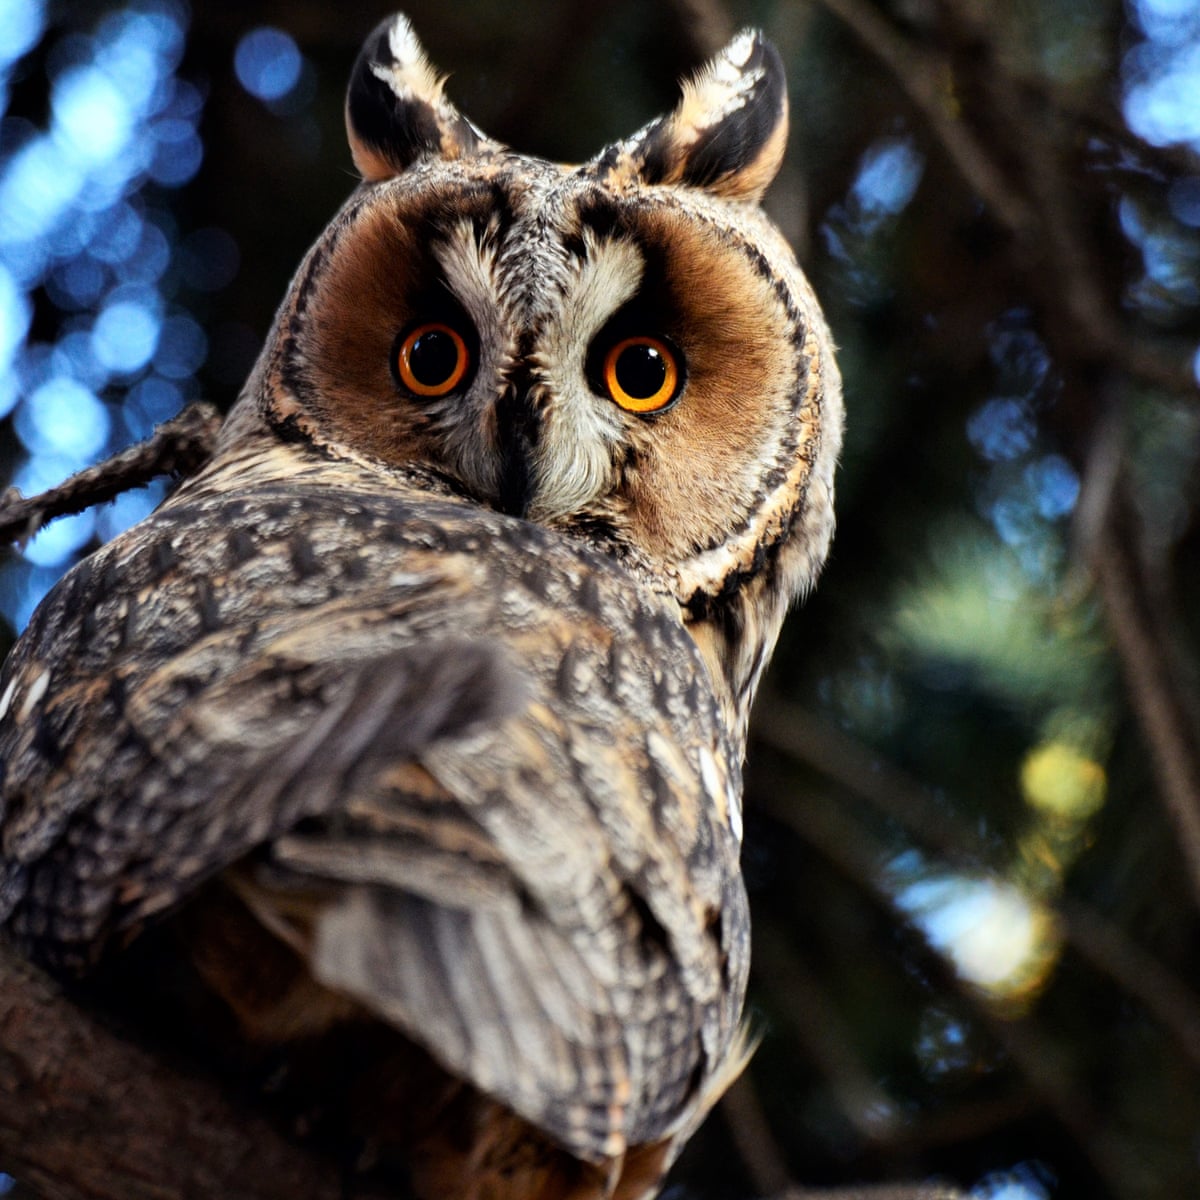 Country diary: the long-eared owl sees a different world to us | Birds | The Guardian